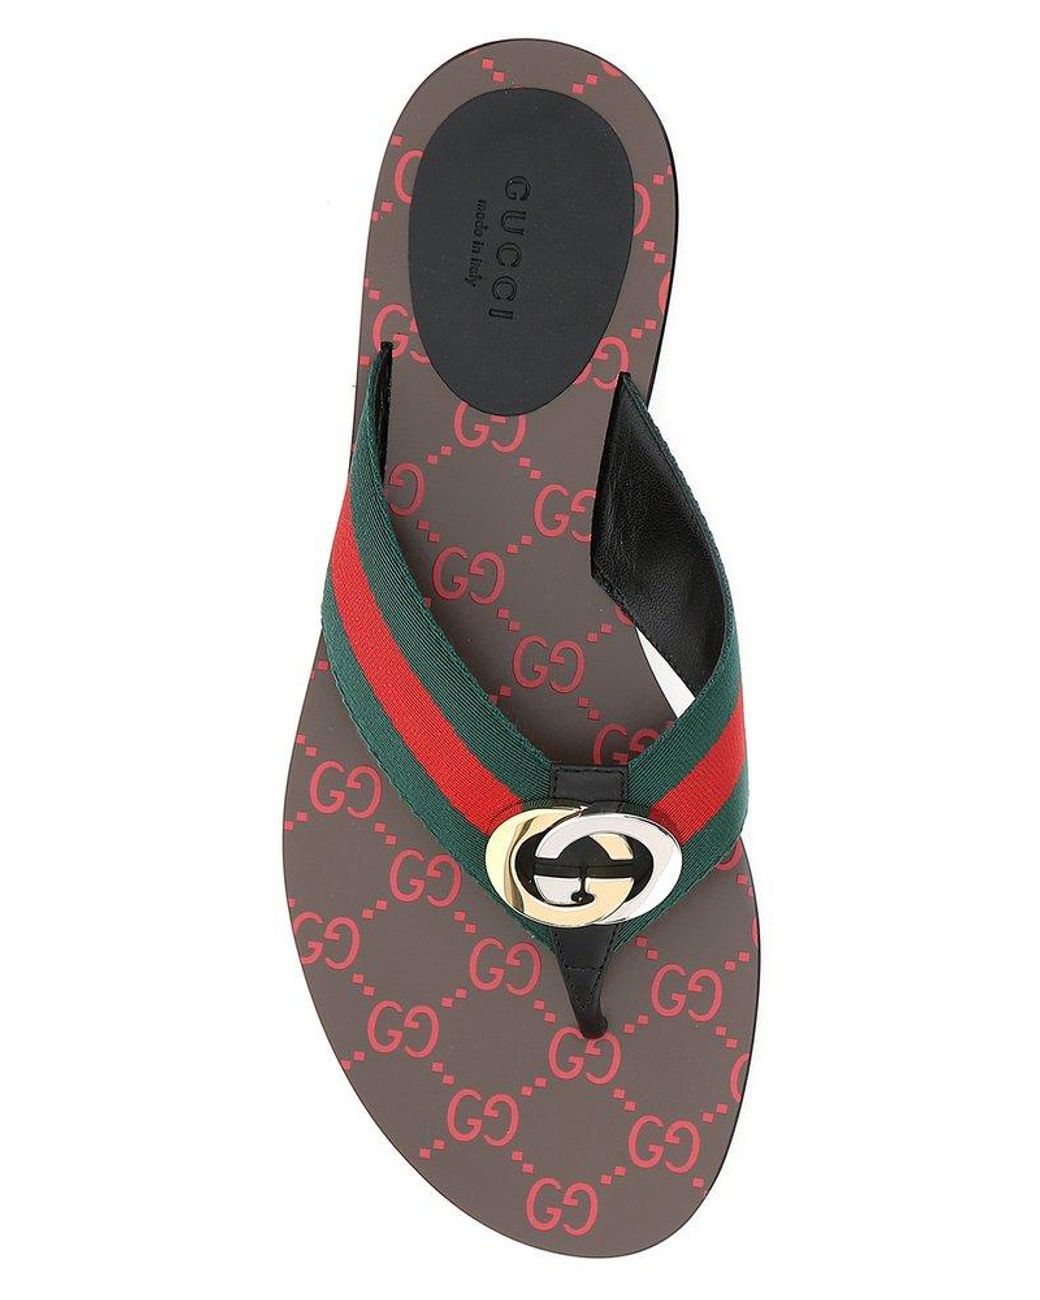 Gucci Double G Thong Sandal Review | Fit, Price, Styling and more! |  Jessica Ashley